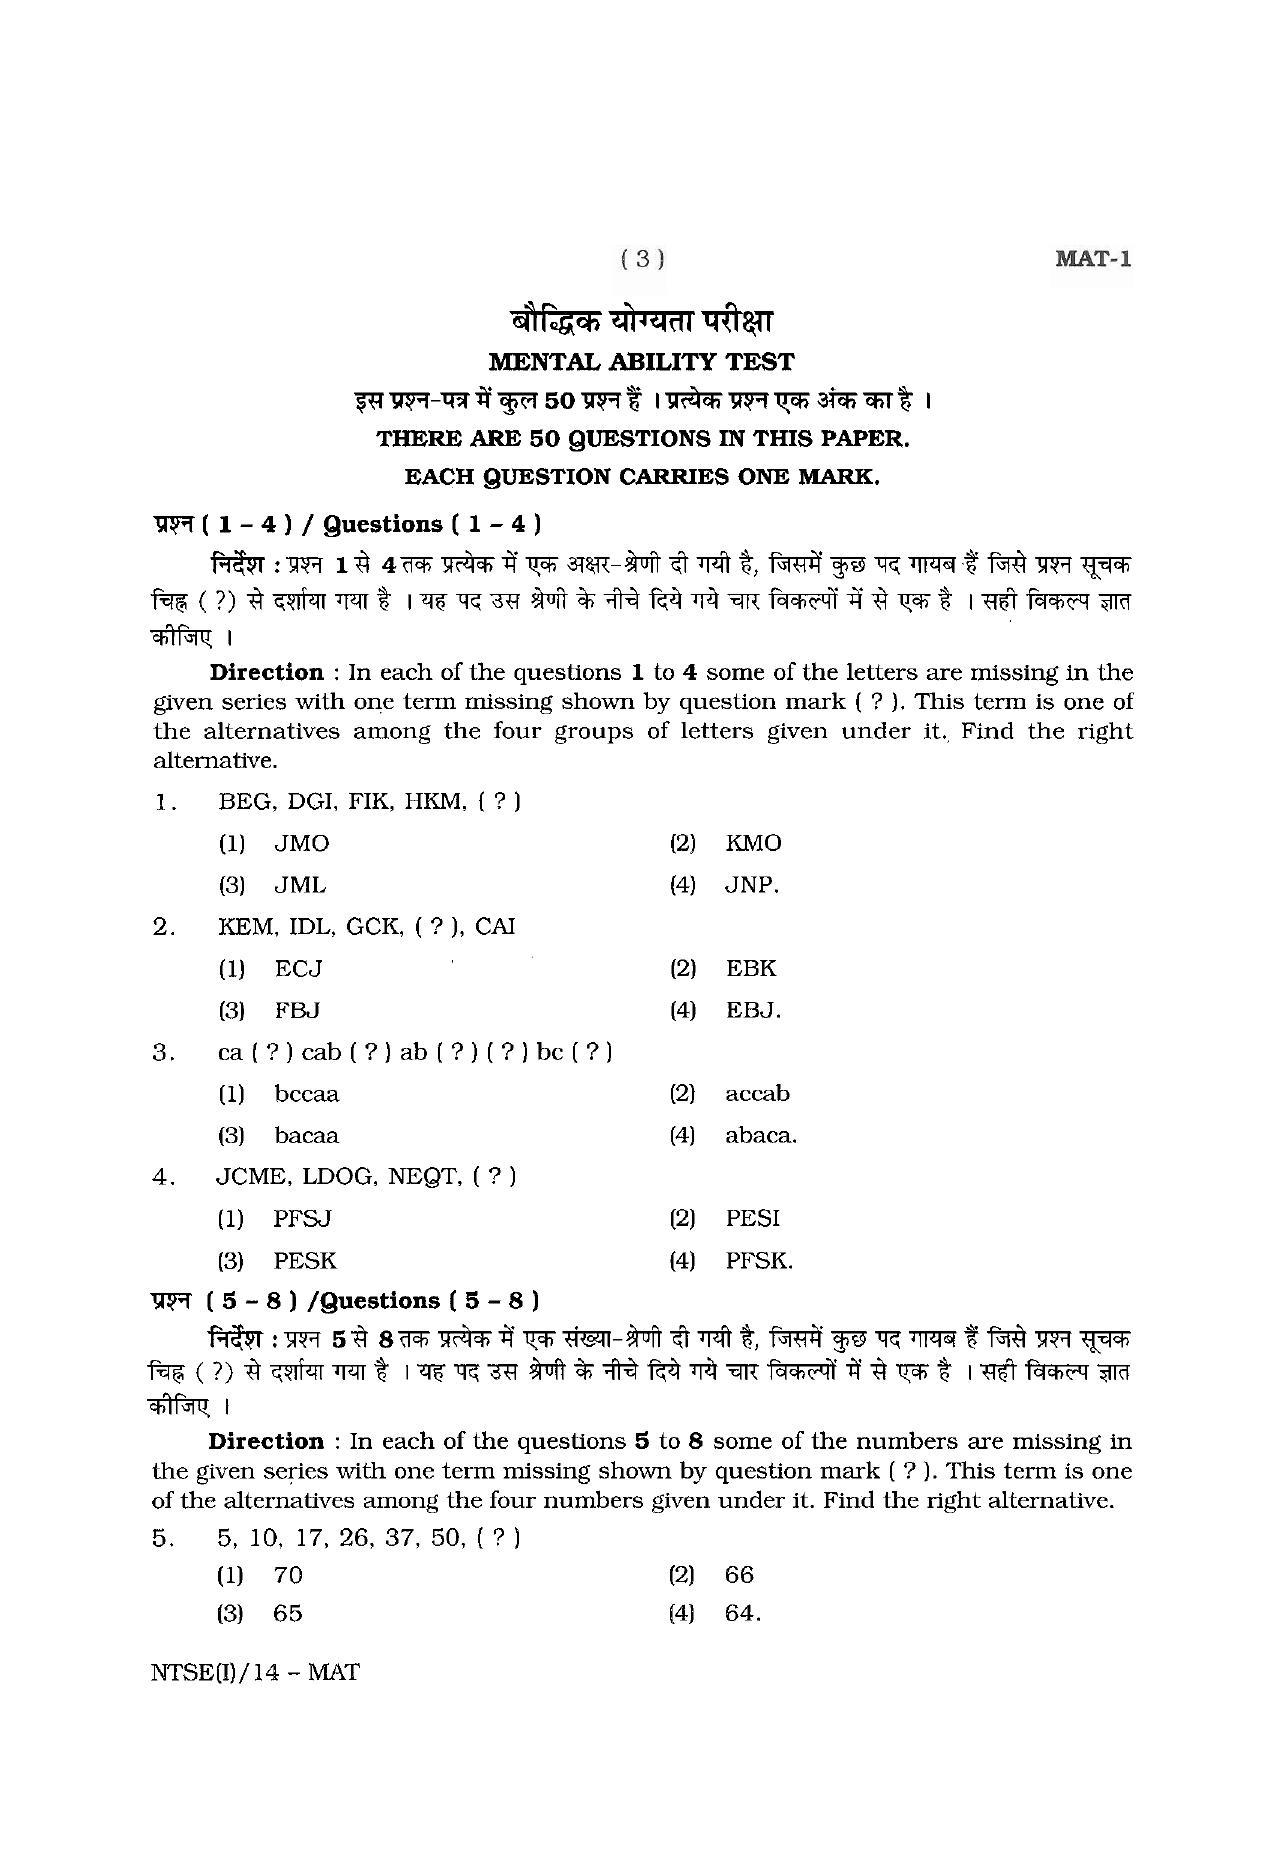 NTSE 2014 (Stage II) MAT Question Paper - Page 3